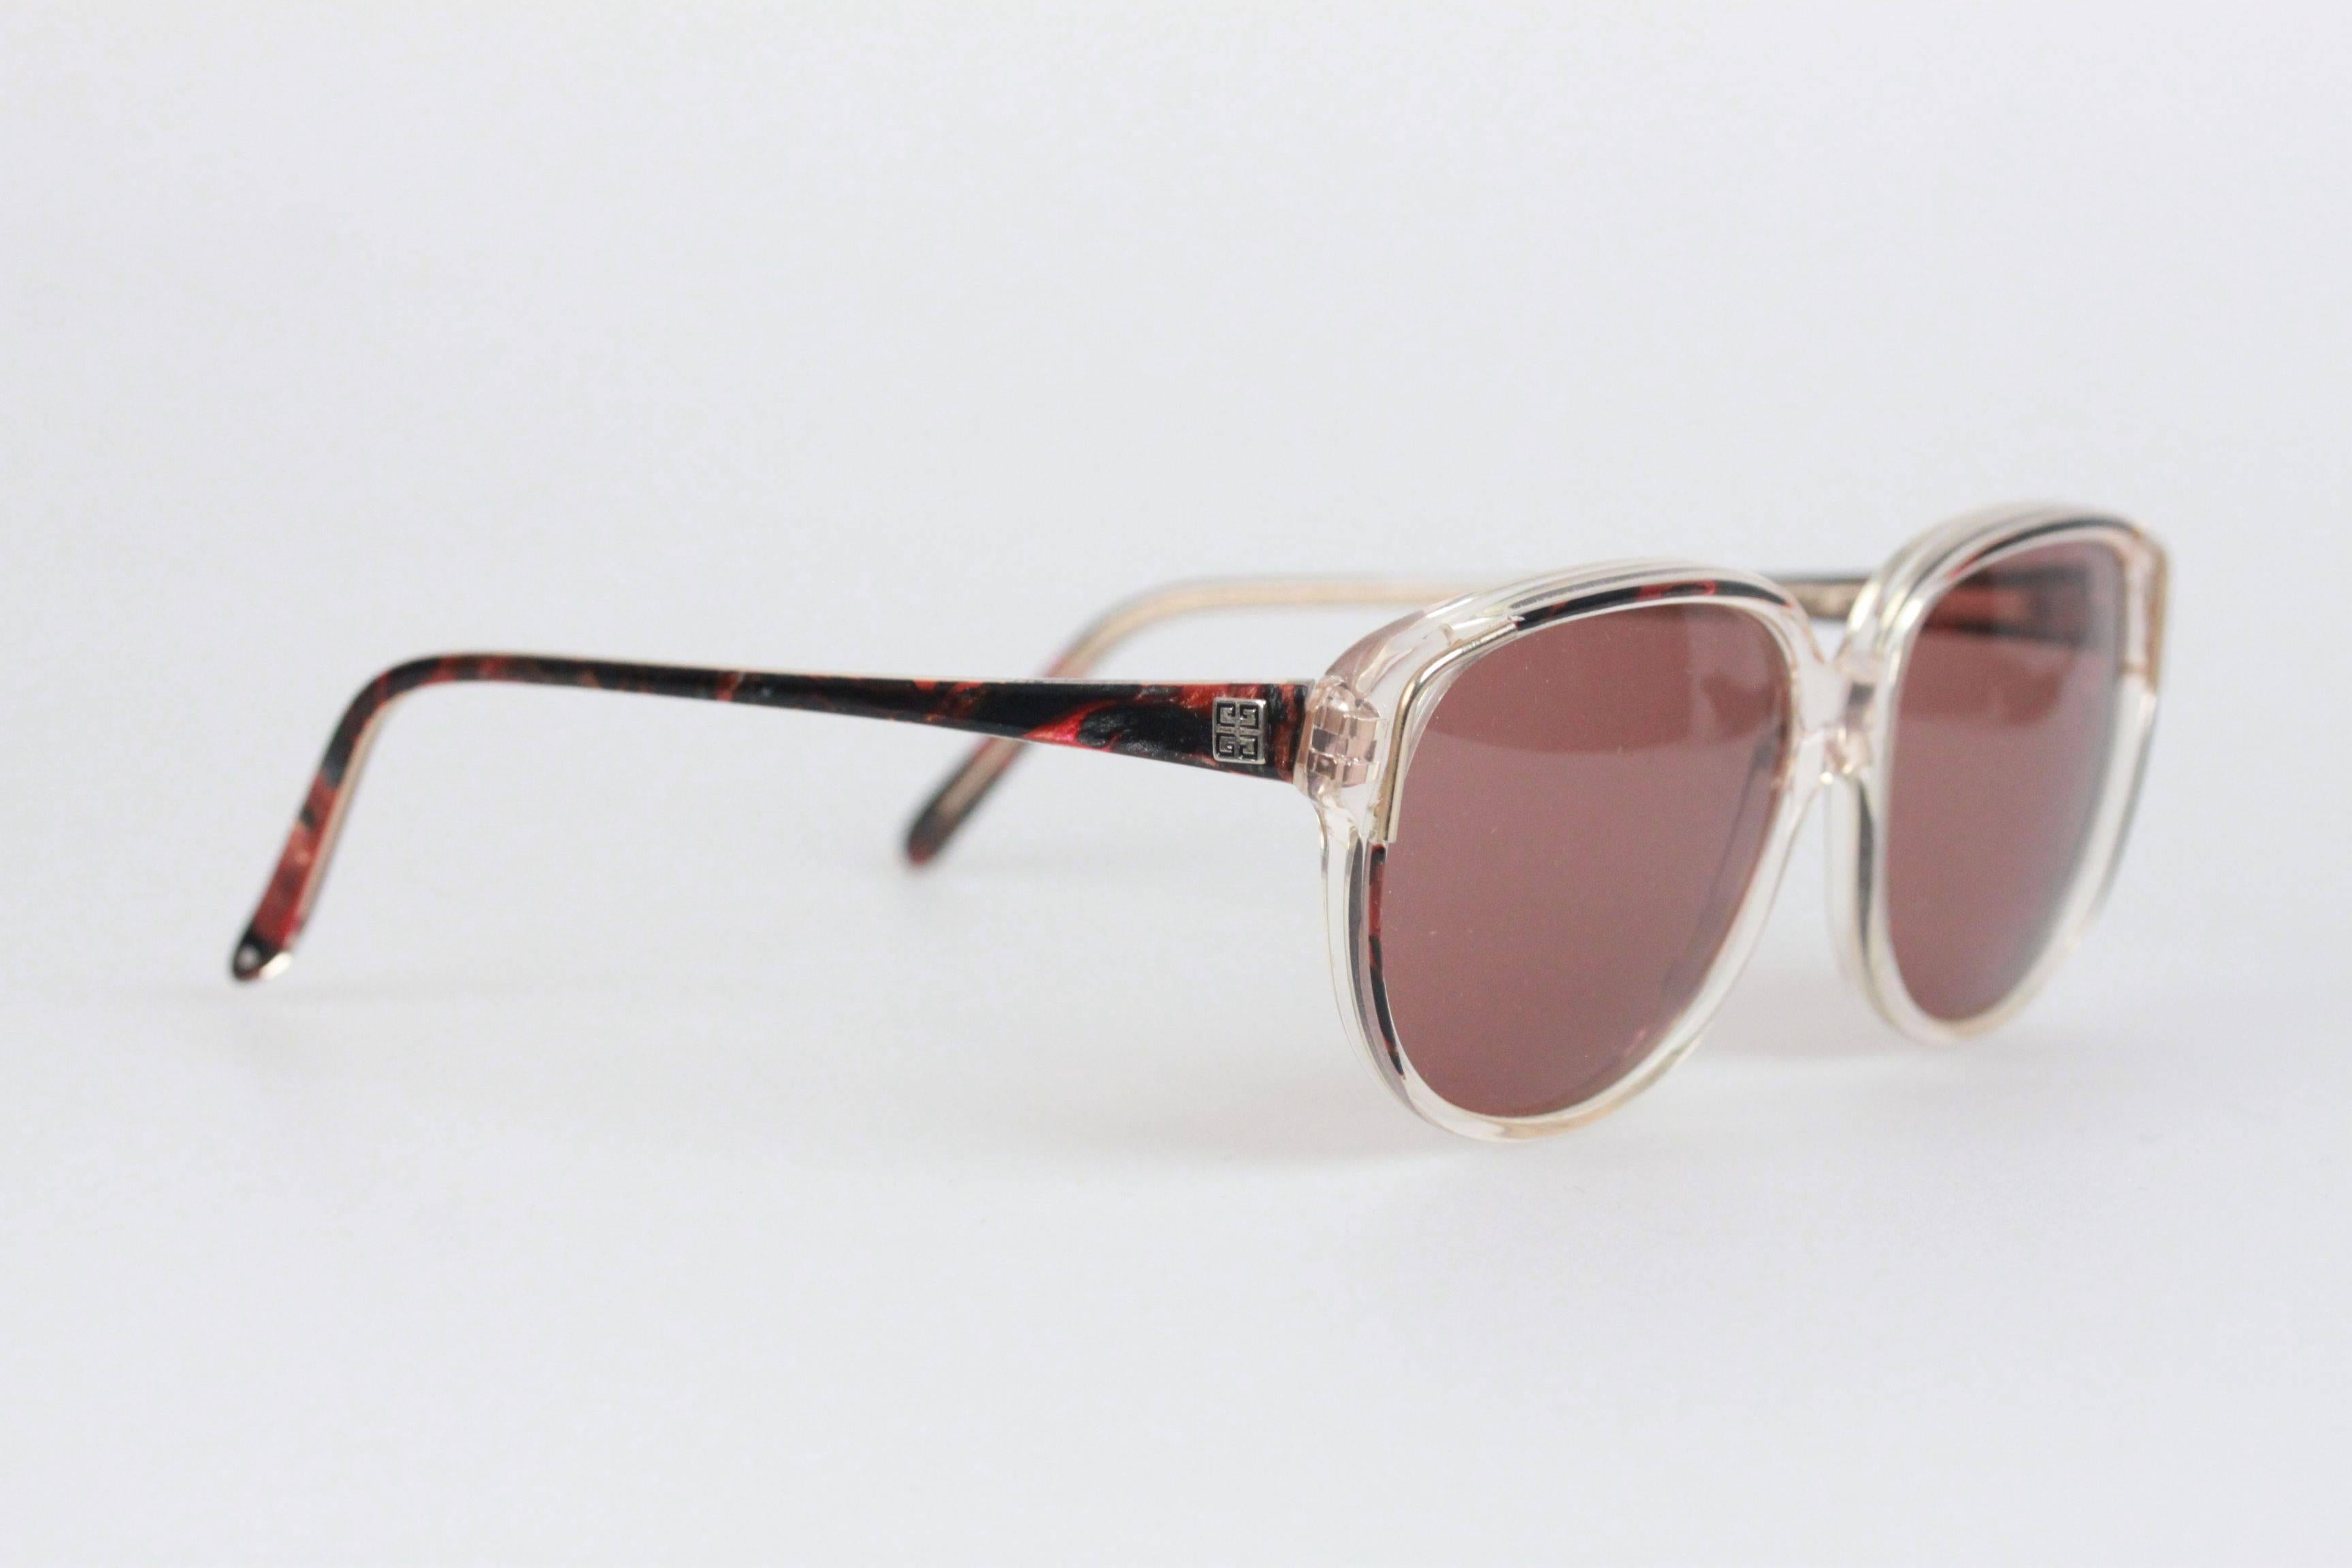 - Mod. G 8912
- Period/Era: 1980s
- Red Marbled / Clear plastic frame
- GIVENCHY logo on temples
- 100% UV protection gray lenses
- Made in France

Measurements:
- TEMPLE LENGTH: 132 mm
- TEMPLE TO TEMPLE - MAX WIDTH: 126 mm
- EYE / LENS WIDTH: 53